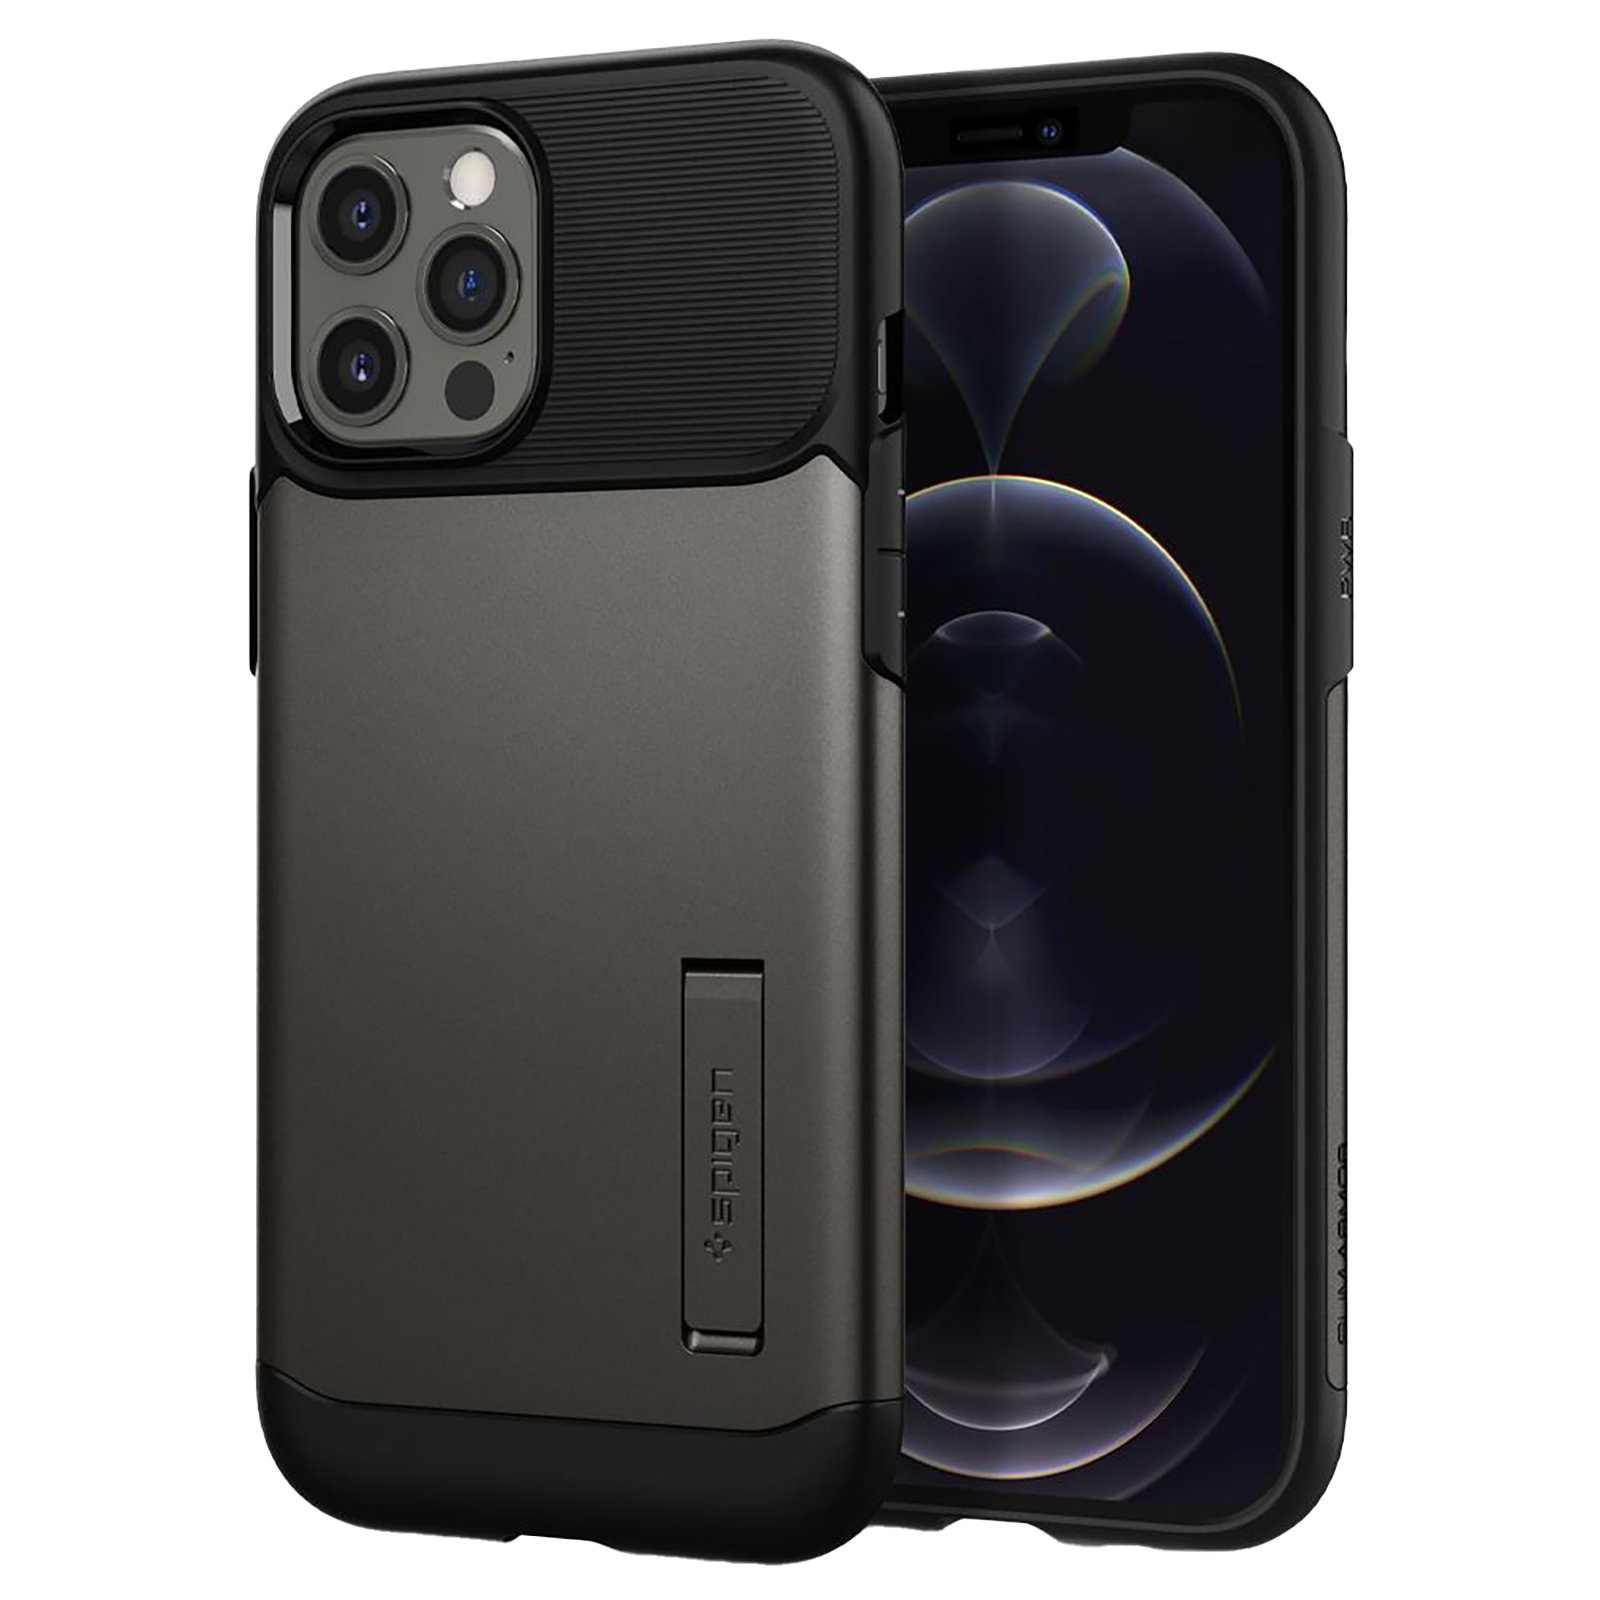 spigen - spigen Slim Armor Polycarbonate Thermoplastic Polyurethane Back Case with Stand for apple iPhone 12 Pro Max (Air Cushion Technology, ACS01480, Gun Metal)